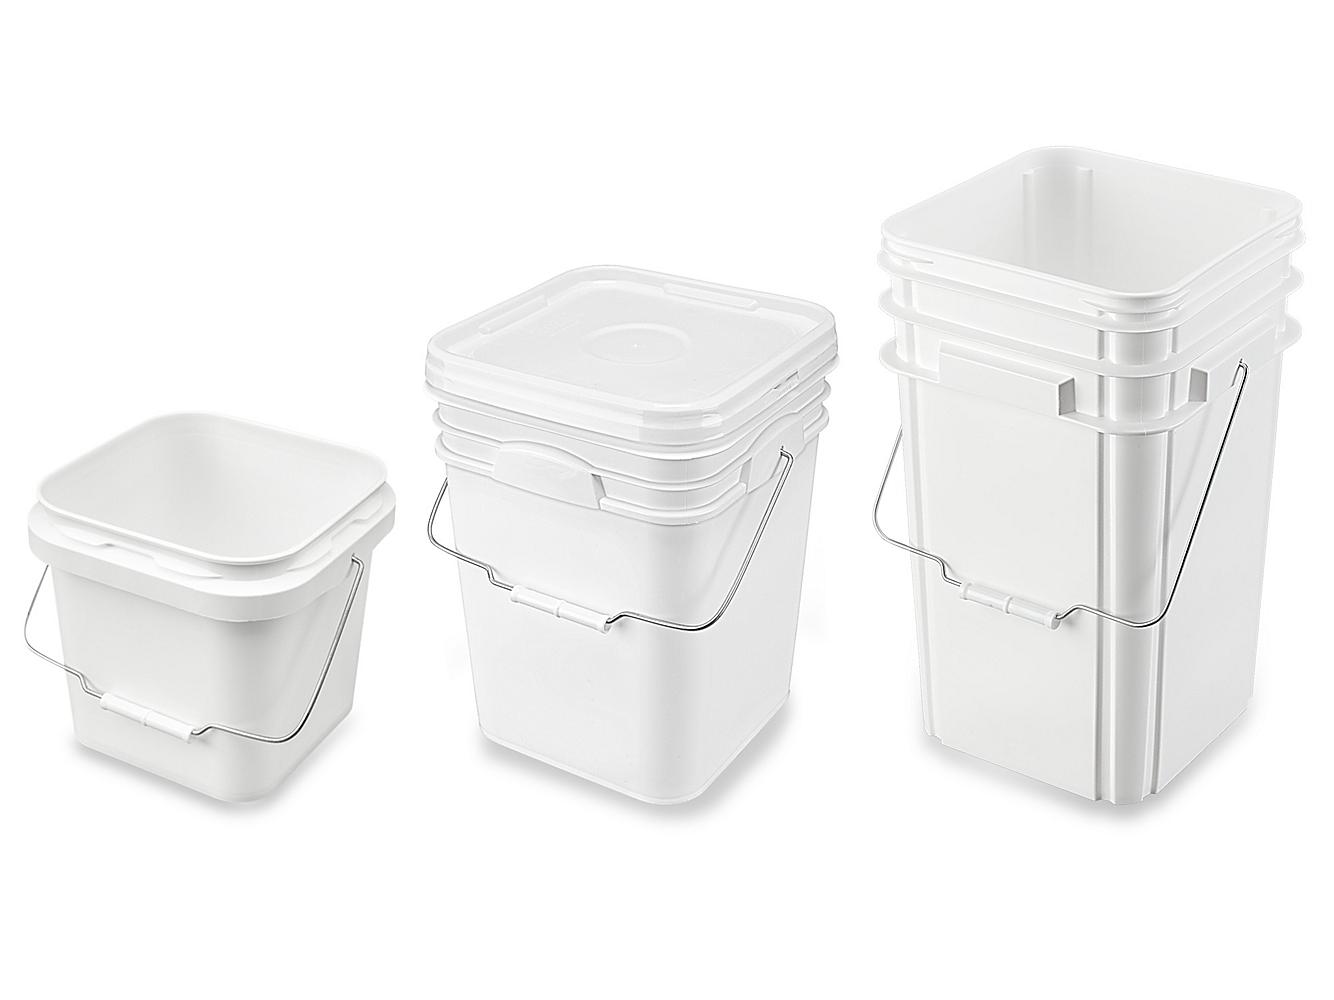 Square Buckets, Square Plastic Buckets with Lids in Stock - ULINE